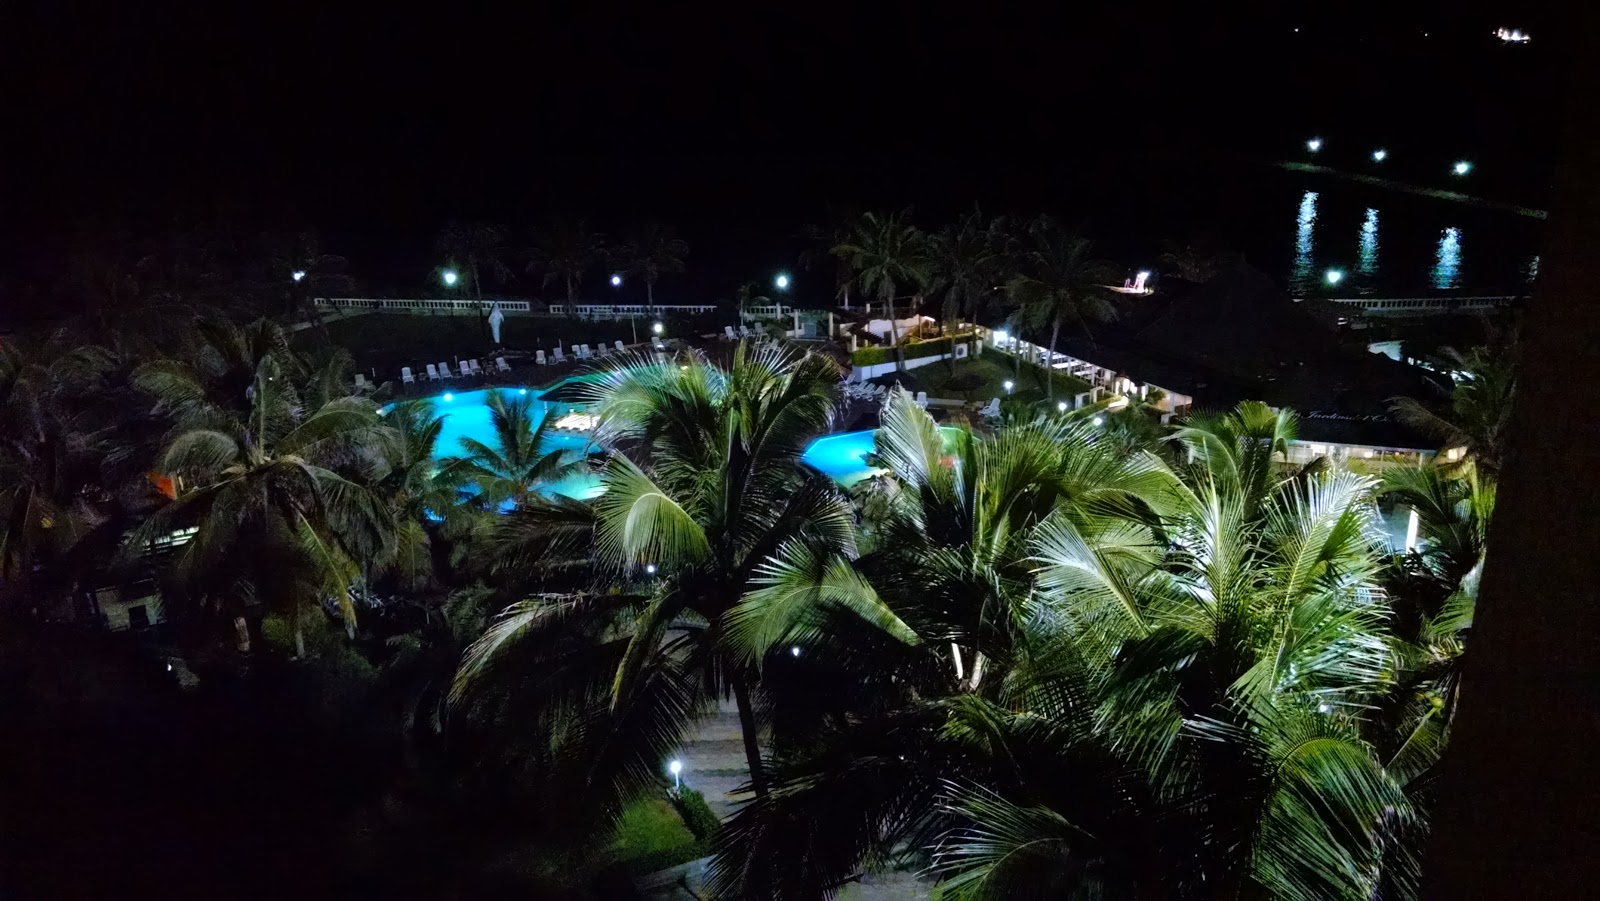 View of a pool surrounded by palm trees at night